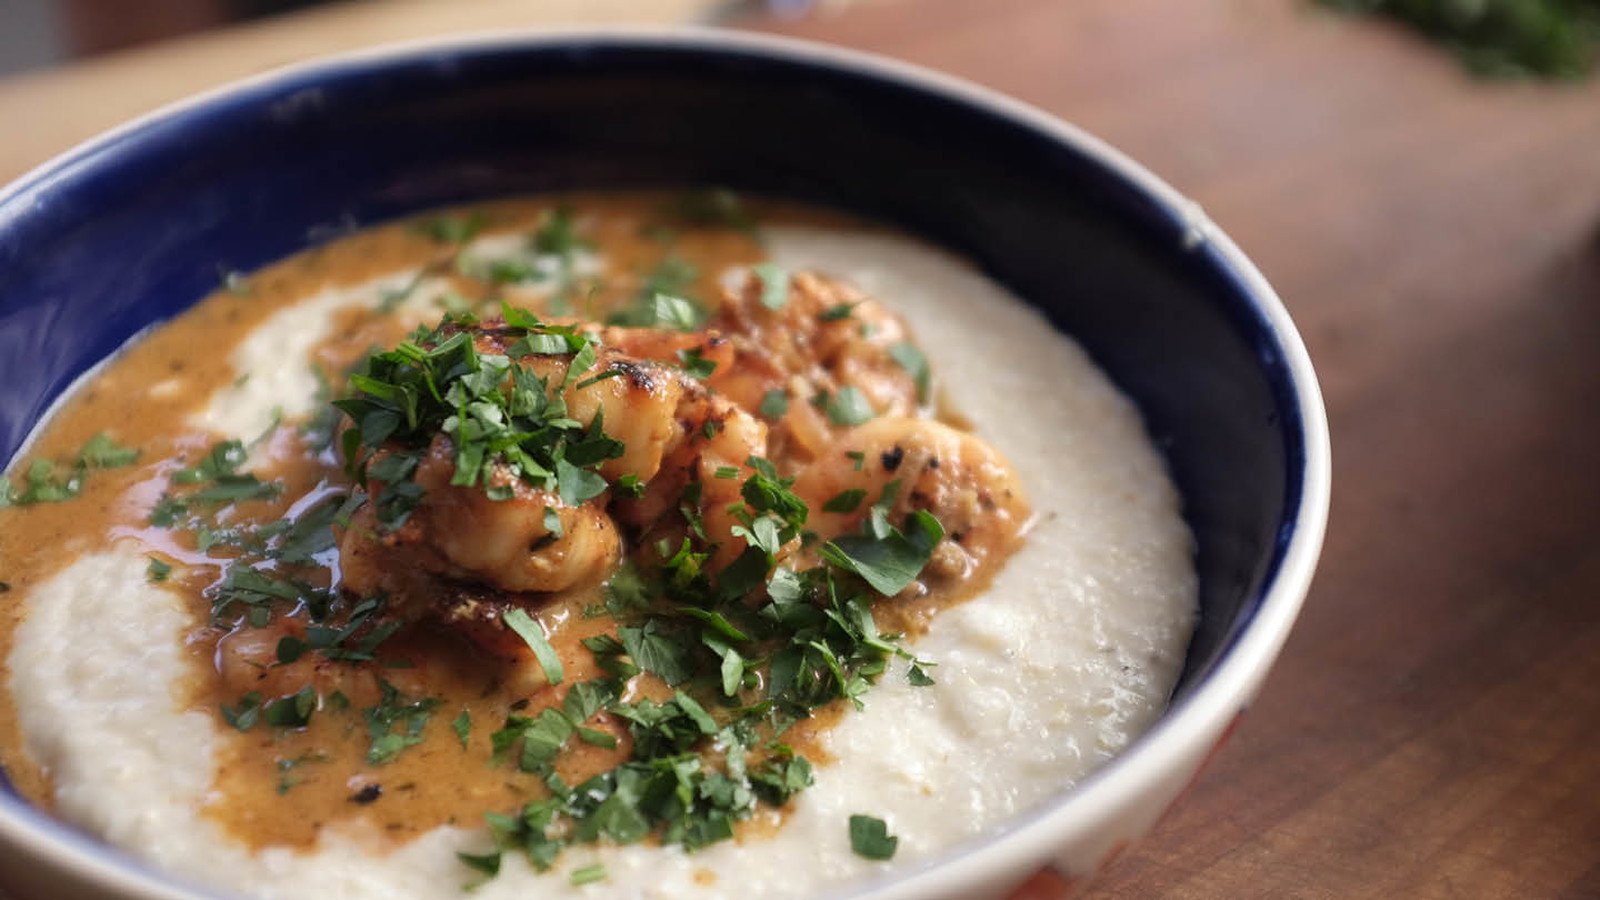 Image of Barbecue Shrimp & Grits with Cynthia